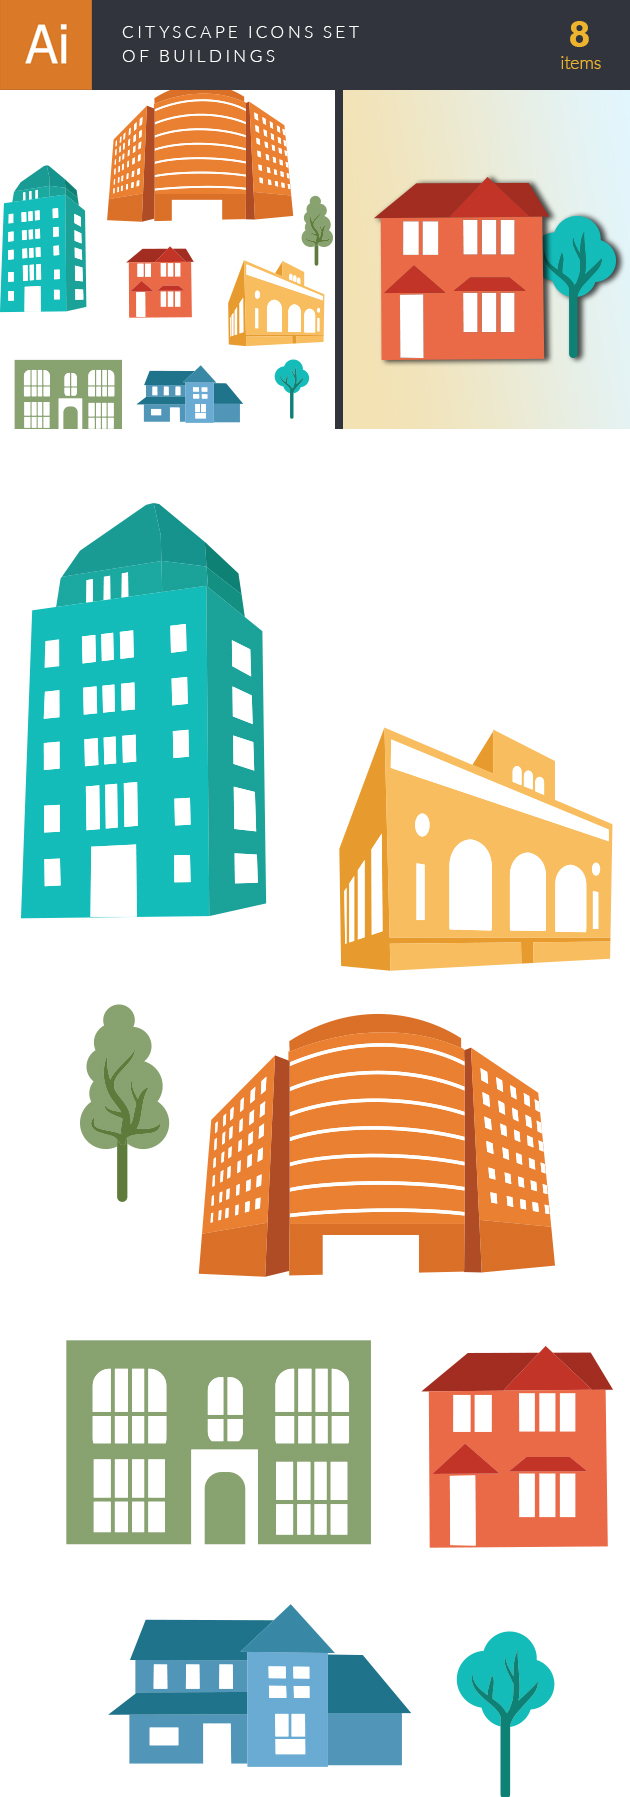 Cityscape Icon Set Of Buildings Vector 2